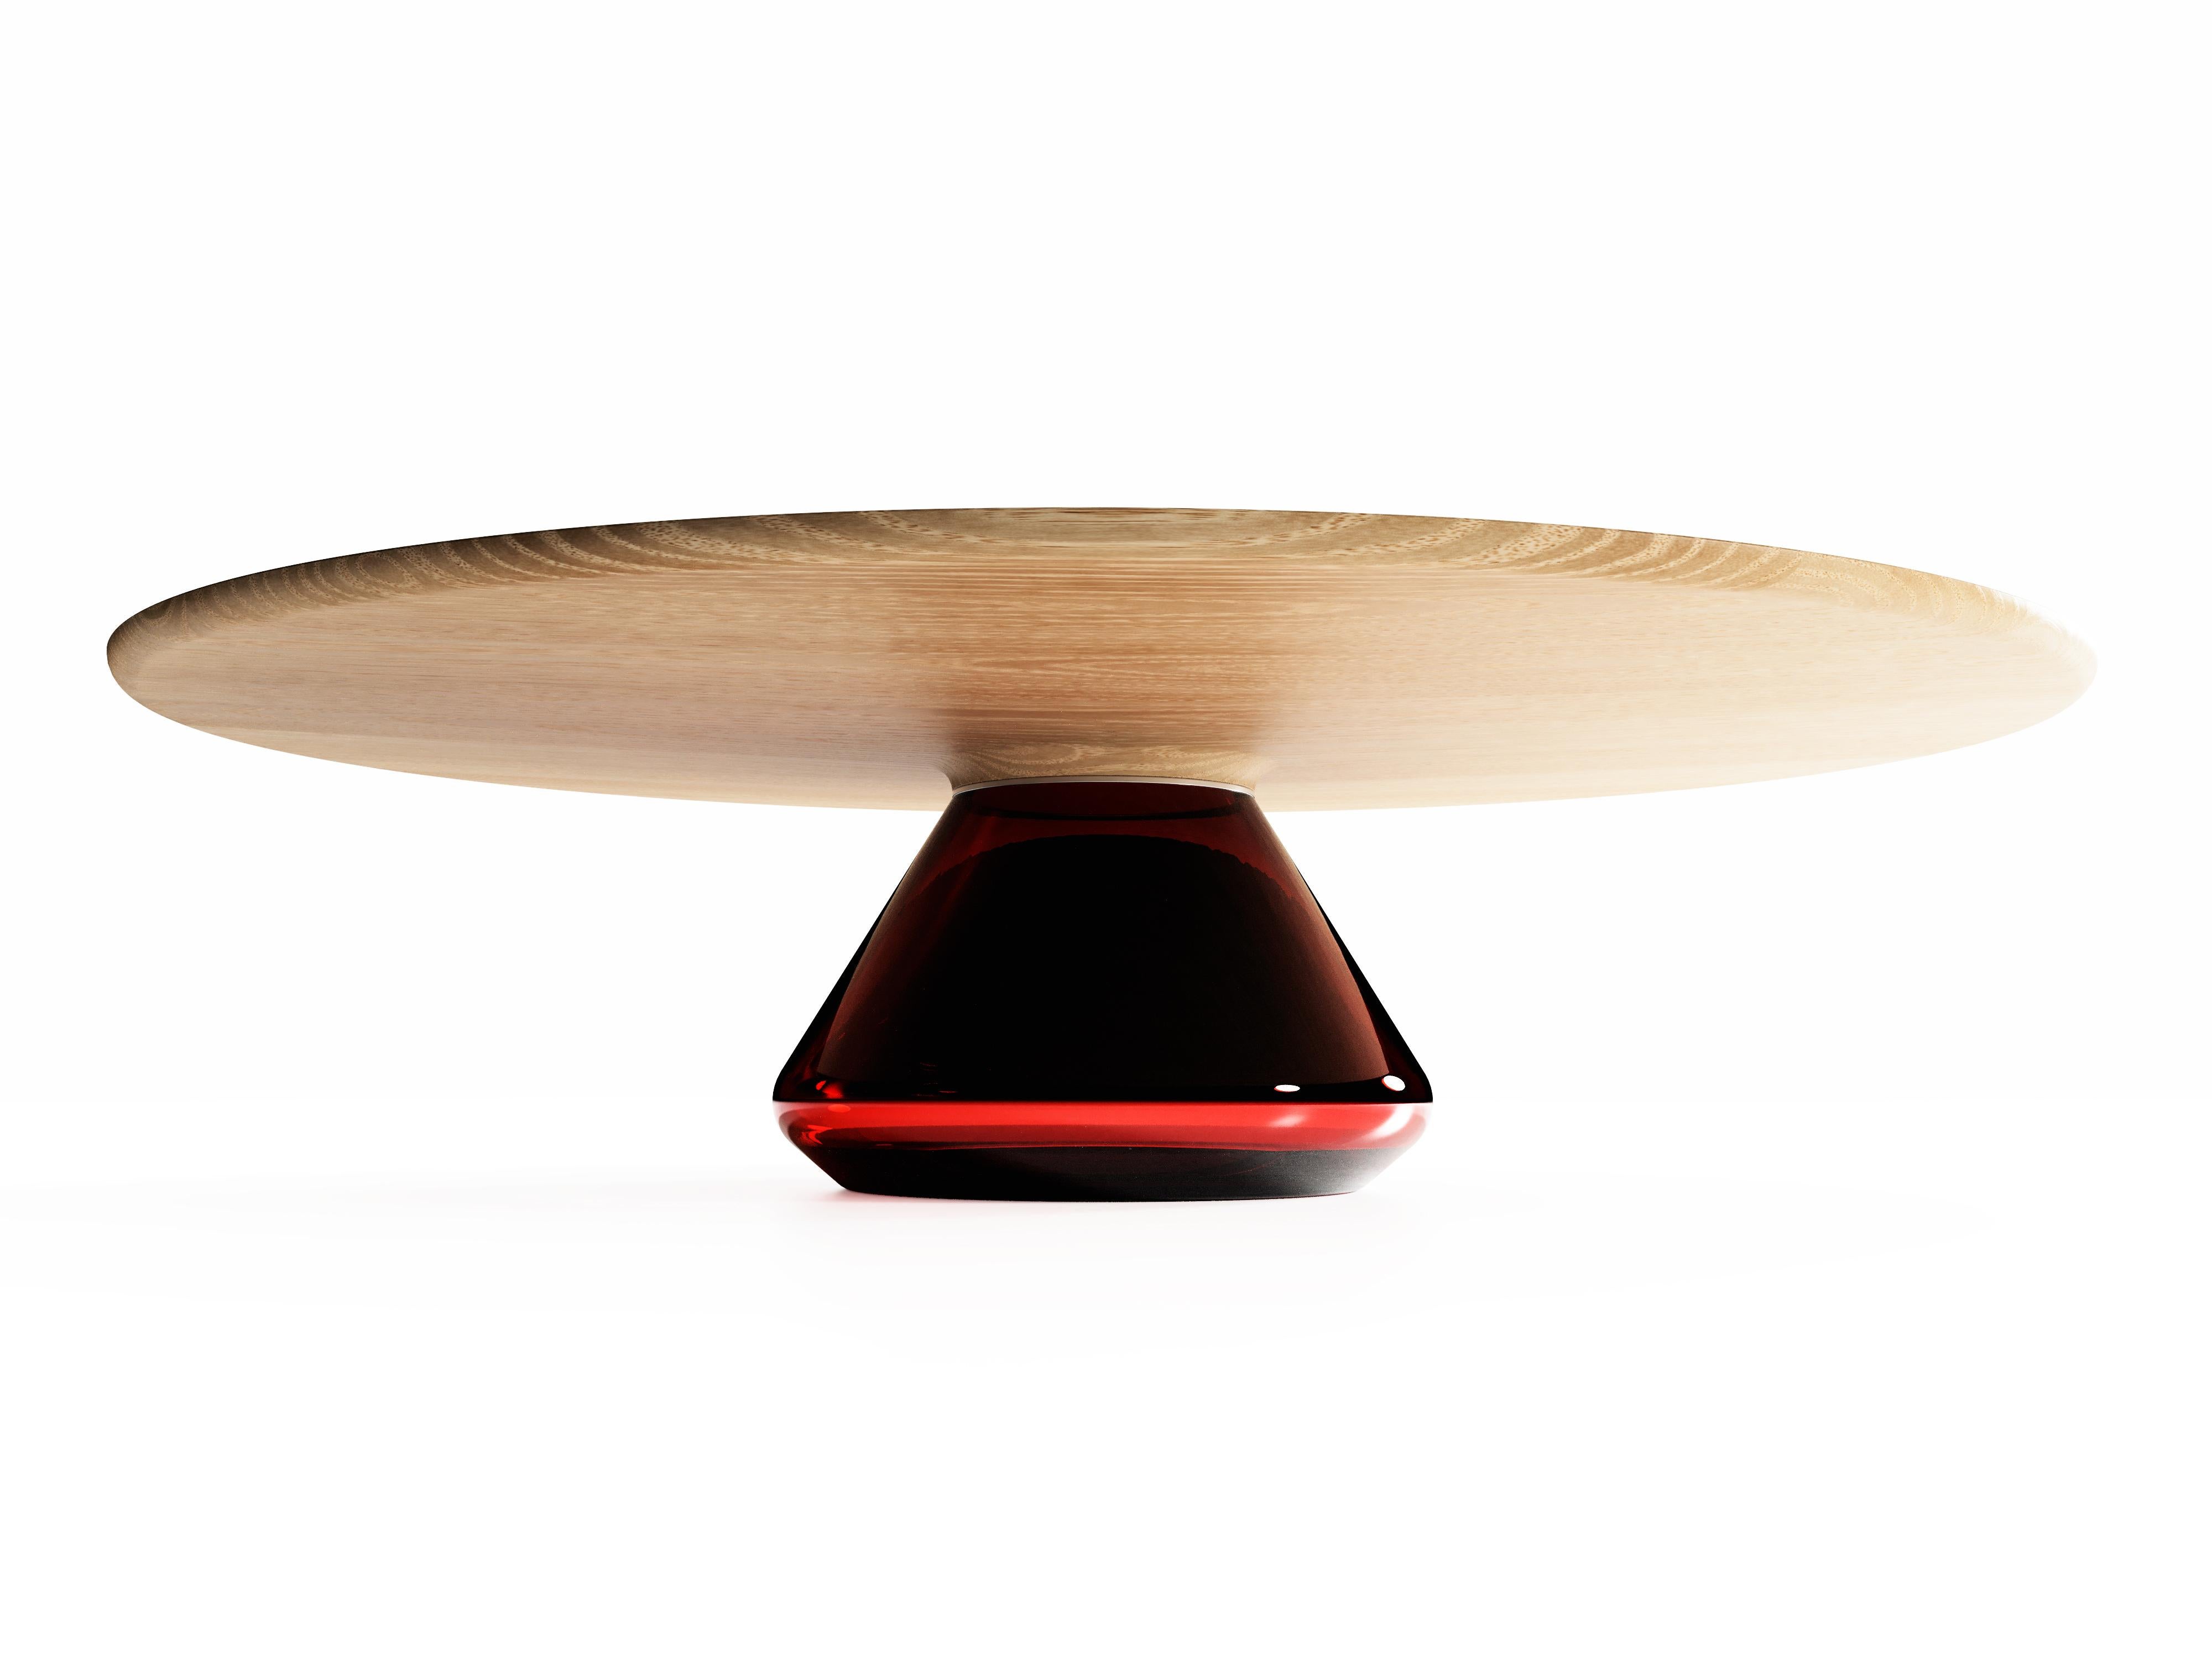 The Ruby Eclipse I, limited edition coffee table by Grzegorz Majka
Limited Edition of 8
Dimensions: 54 x 48 x 14 in
Materials: Glass, oak

The total eclipse of every interior? With this amazing table everything is possible as with its